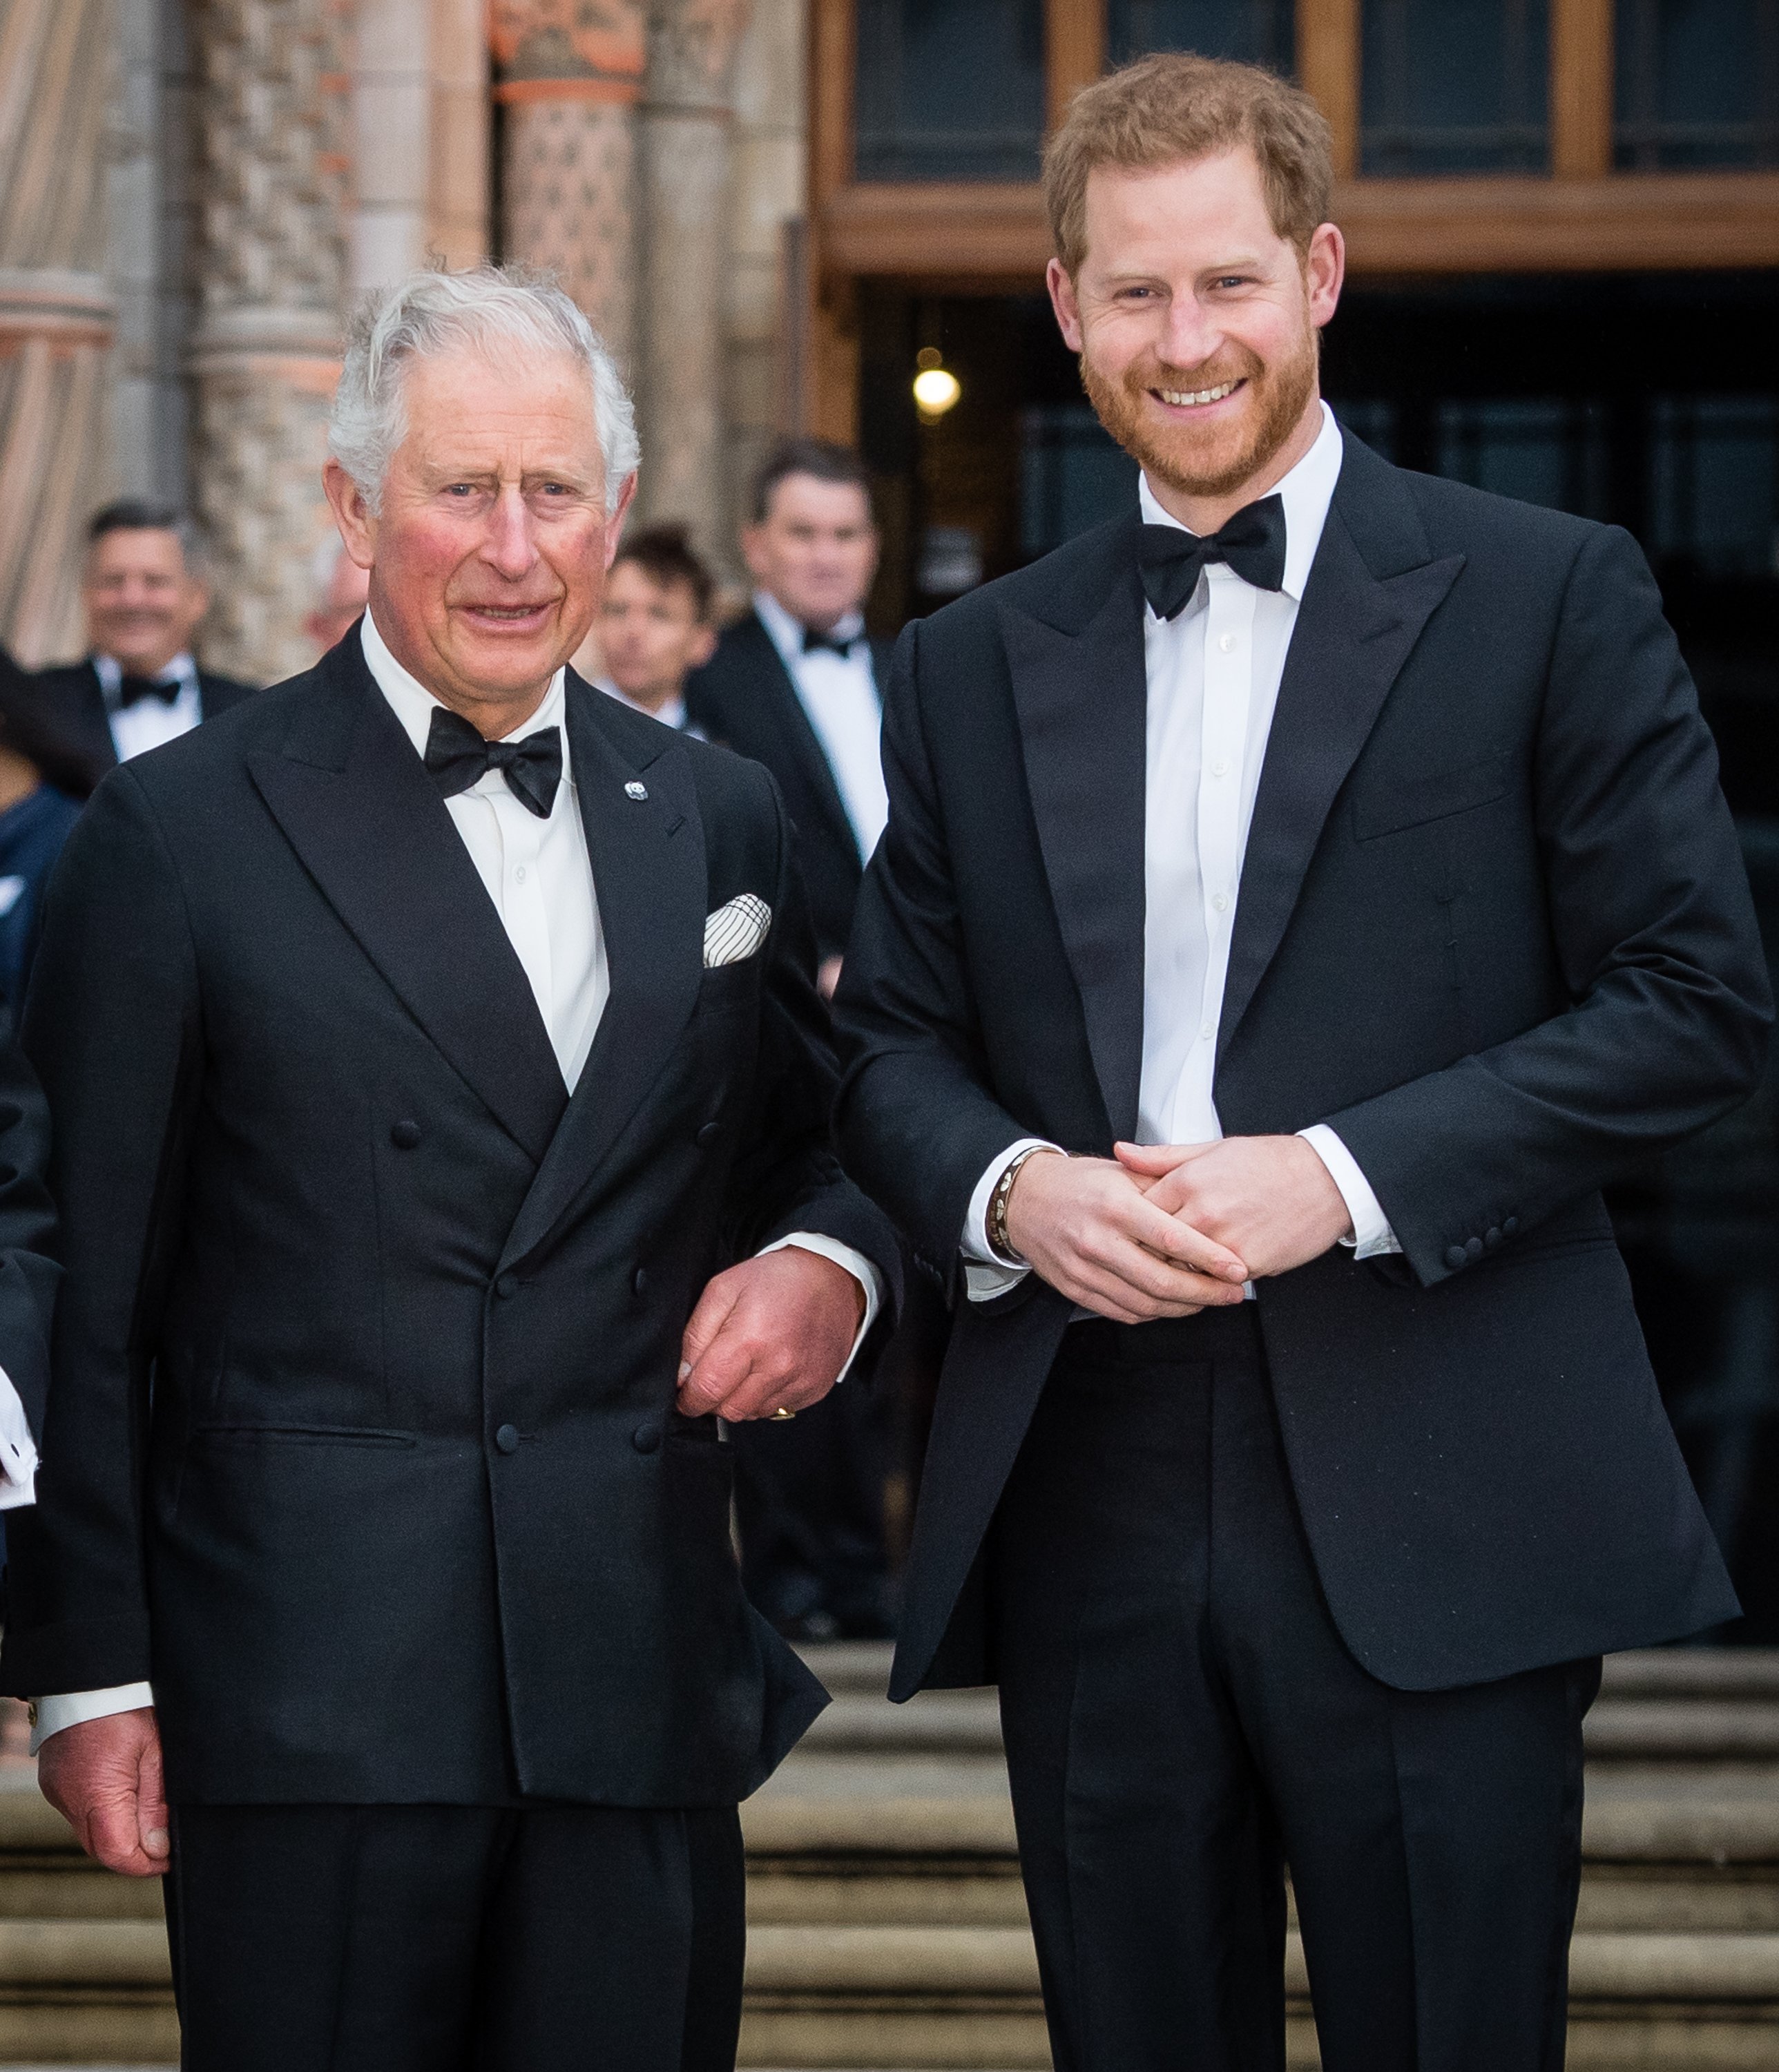 King Charles III and Prince Harry in London 2019. | Source: Getty Images